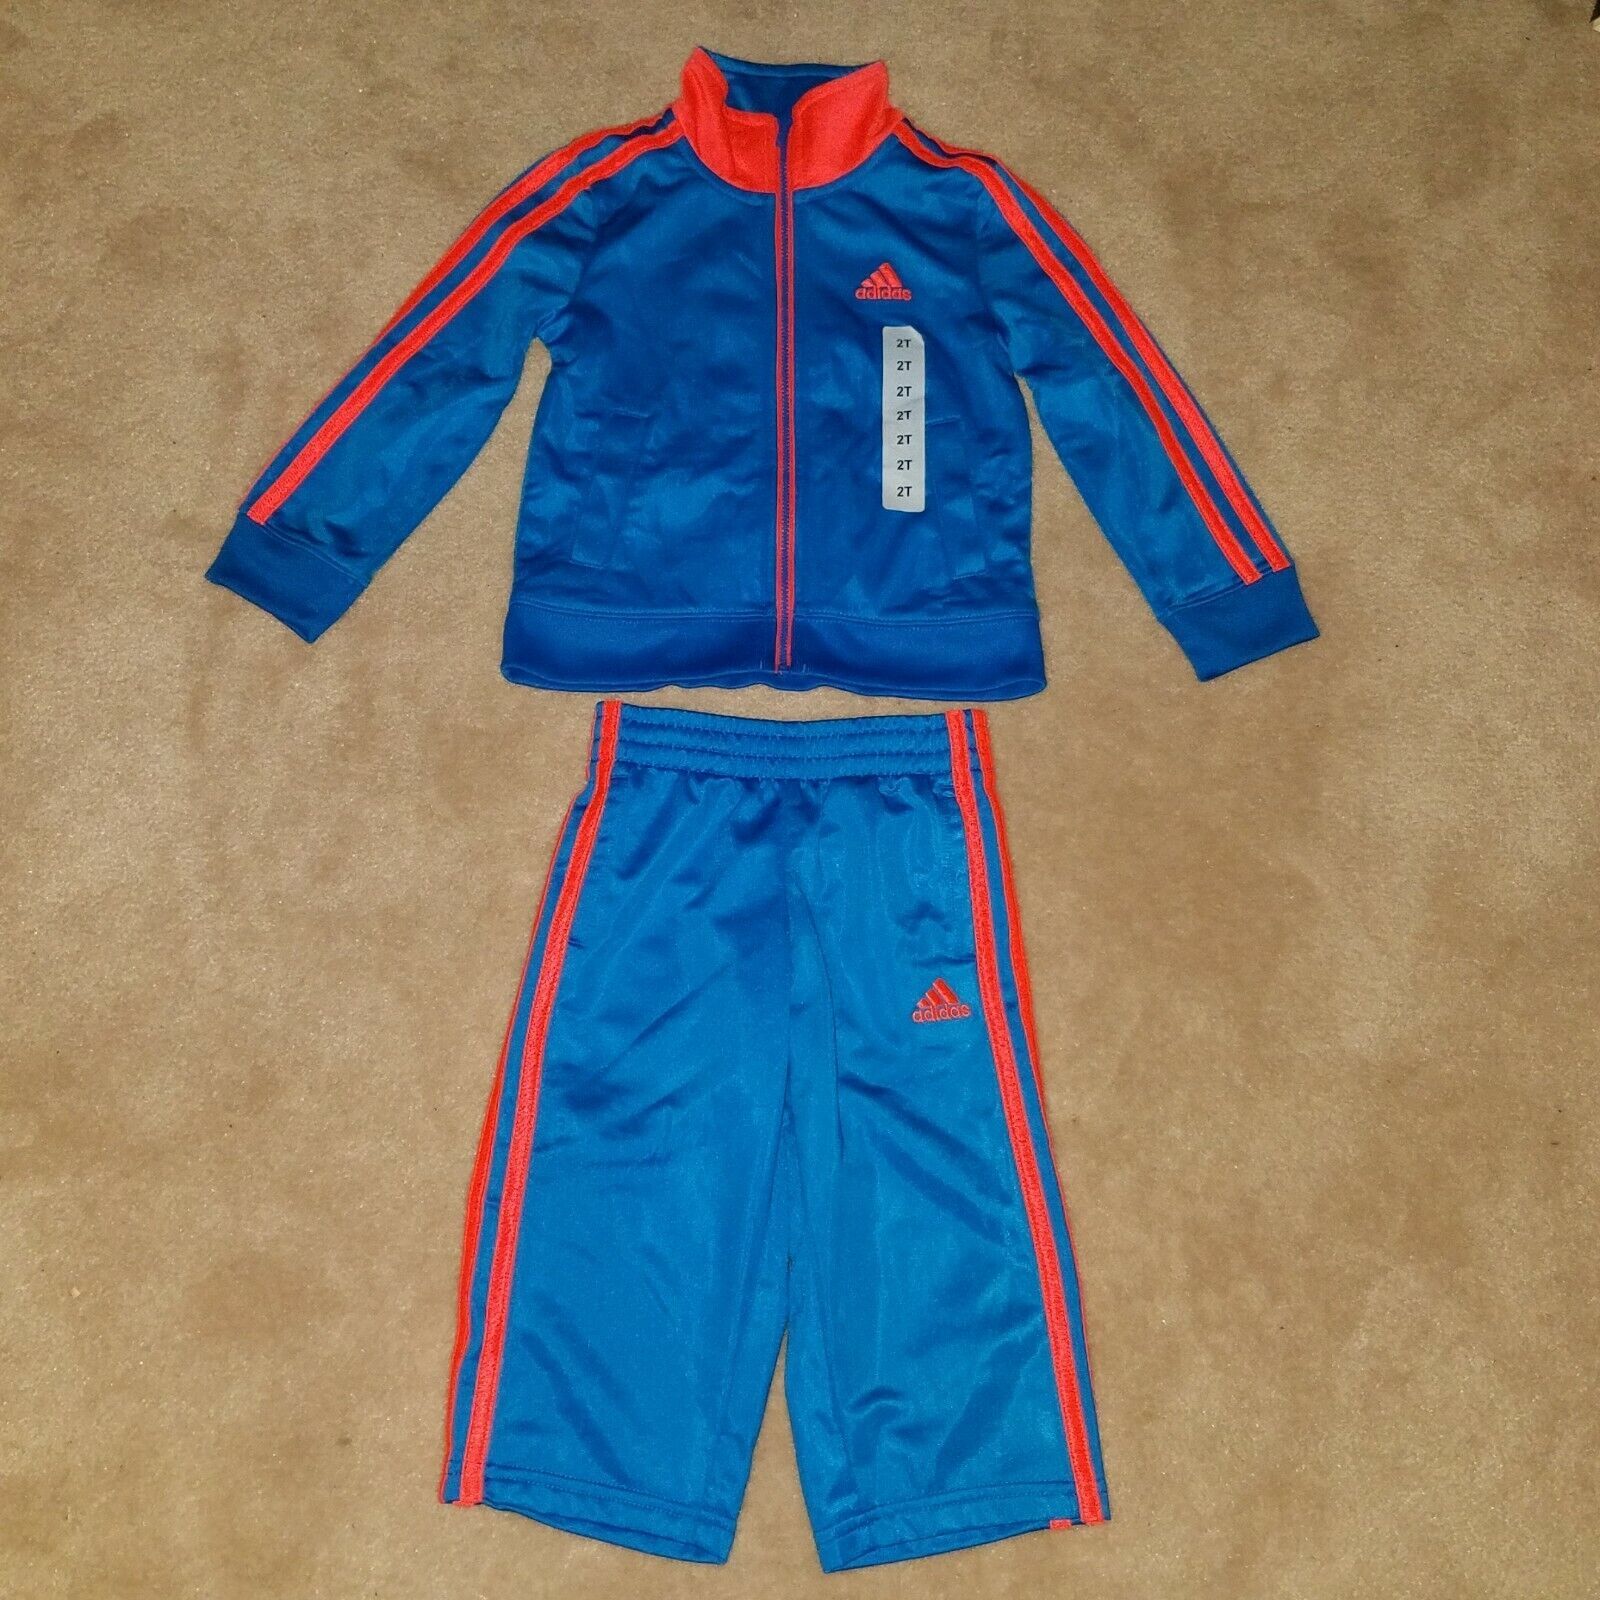 Primary image for NEW Adidas Blue Salmon Orange Matching Outfit Zip Sweatshirt Pants Toddler 2T